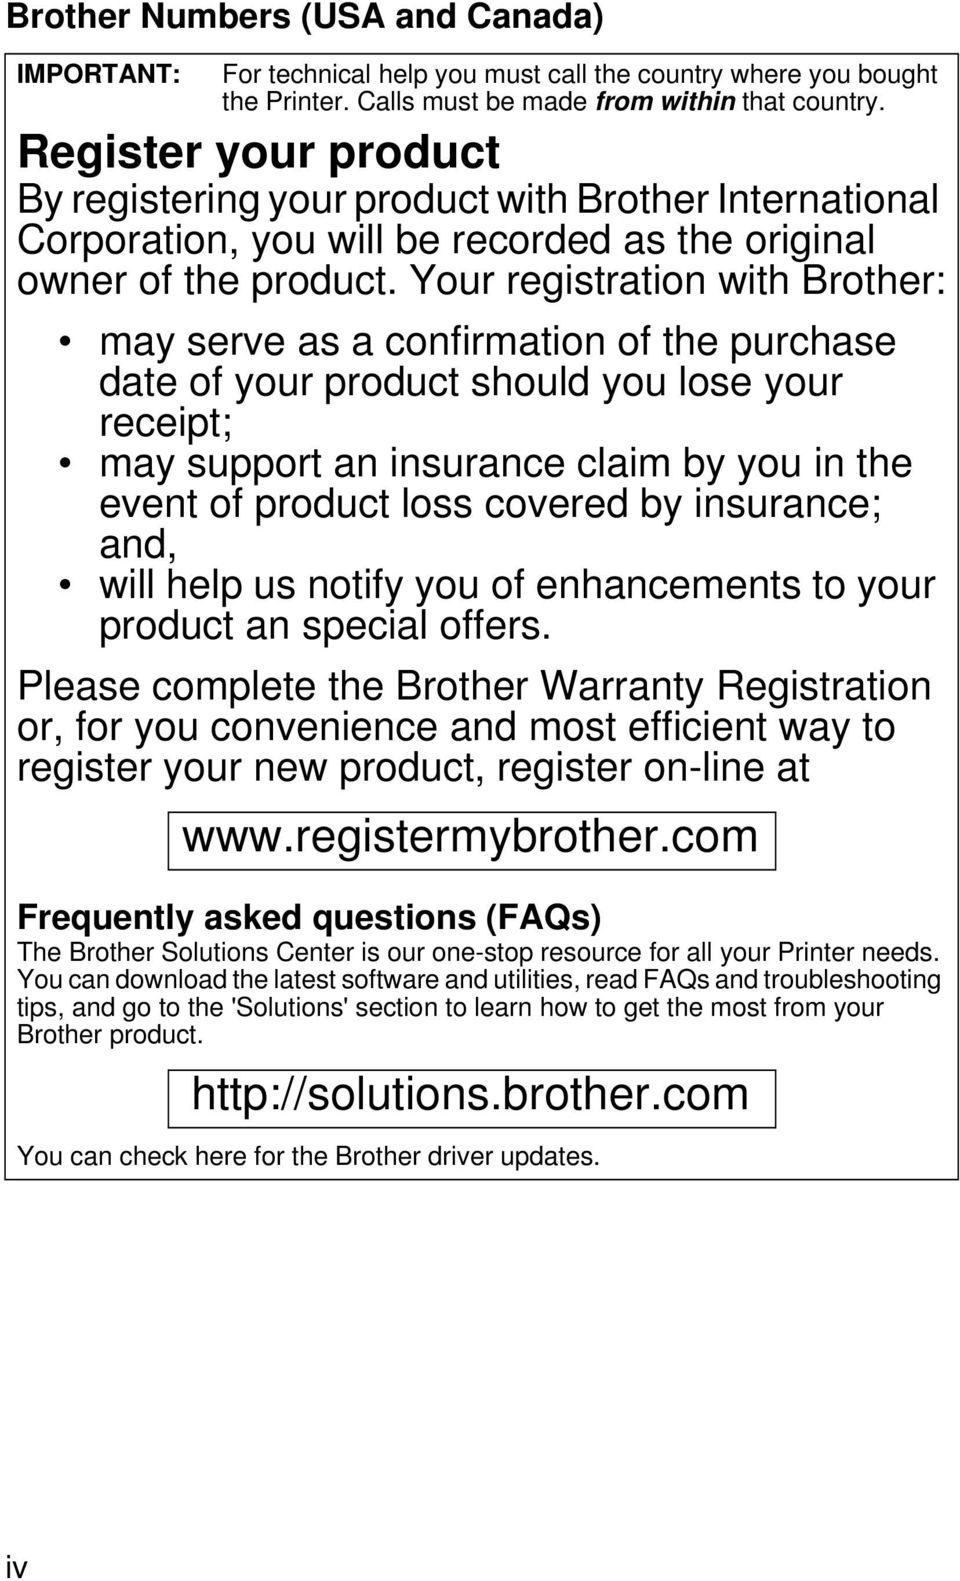 Your registration with Brother: may serve as a confirmation of the purchase date of your product should you lose your receipt; may support an insurance claim by you in the event of product loss